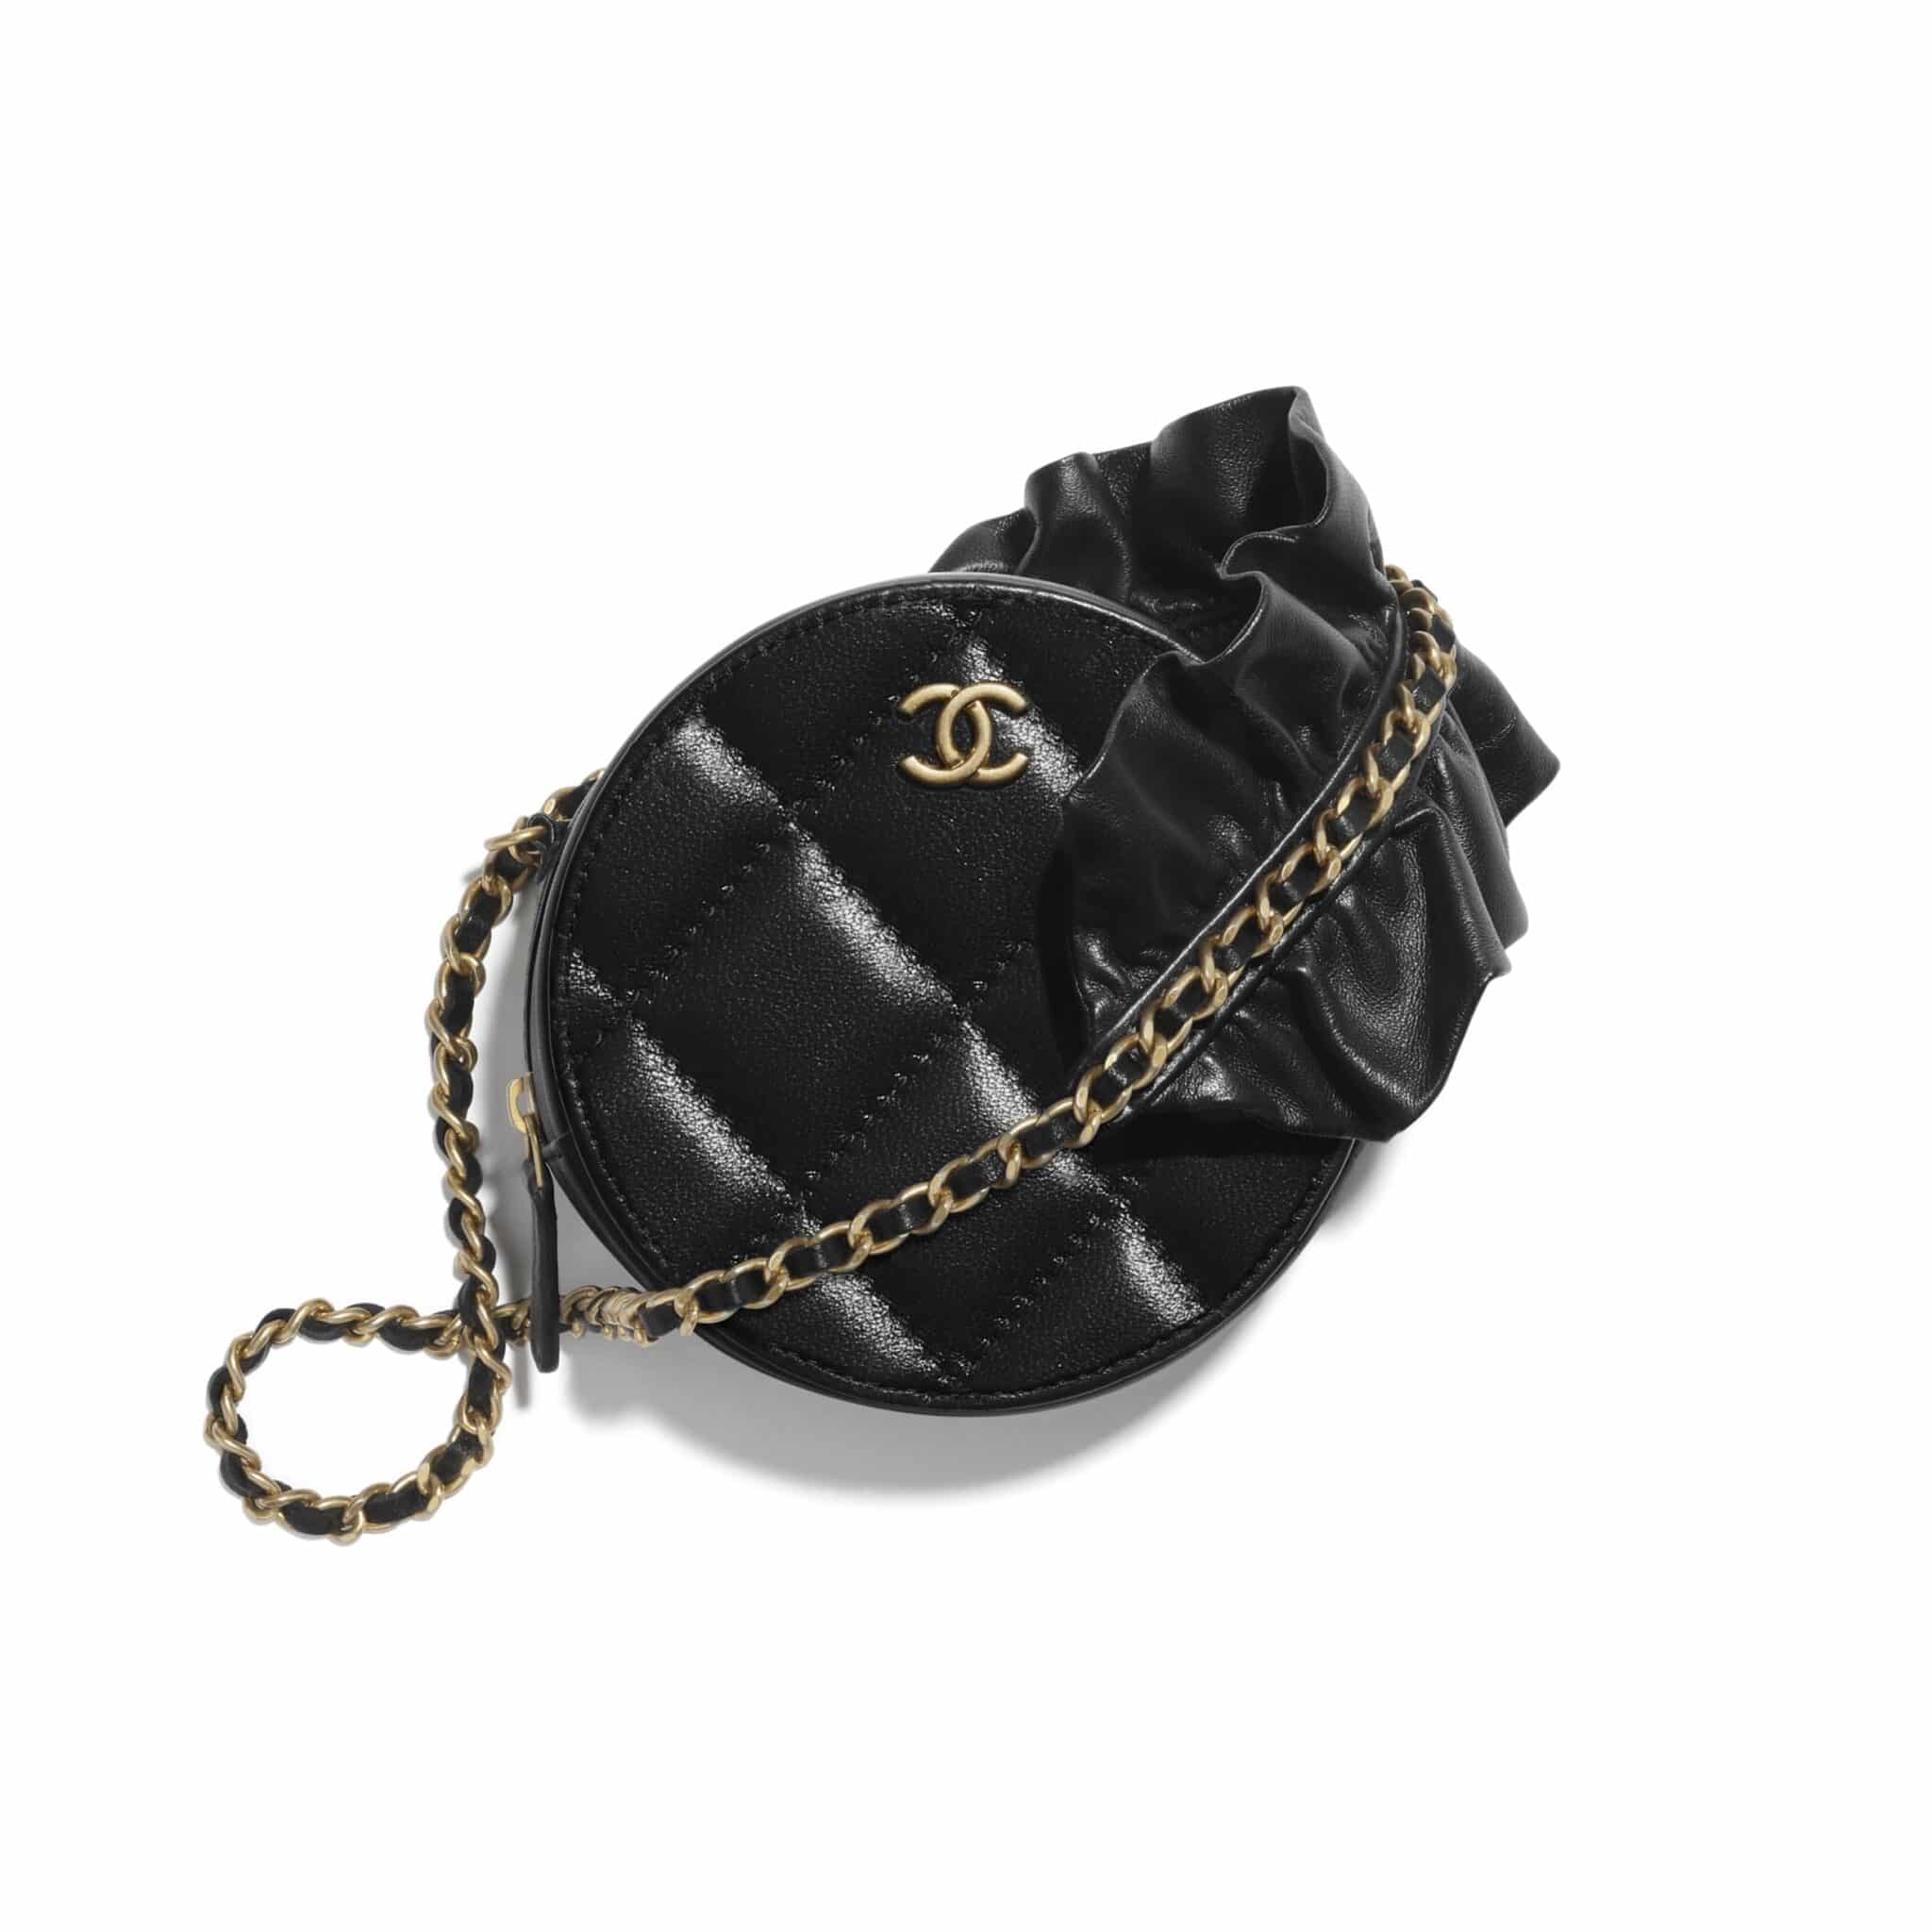 Chanel Fall/Winter 2020 Small Leather Goods Collection - Spotted